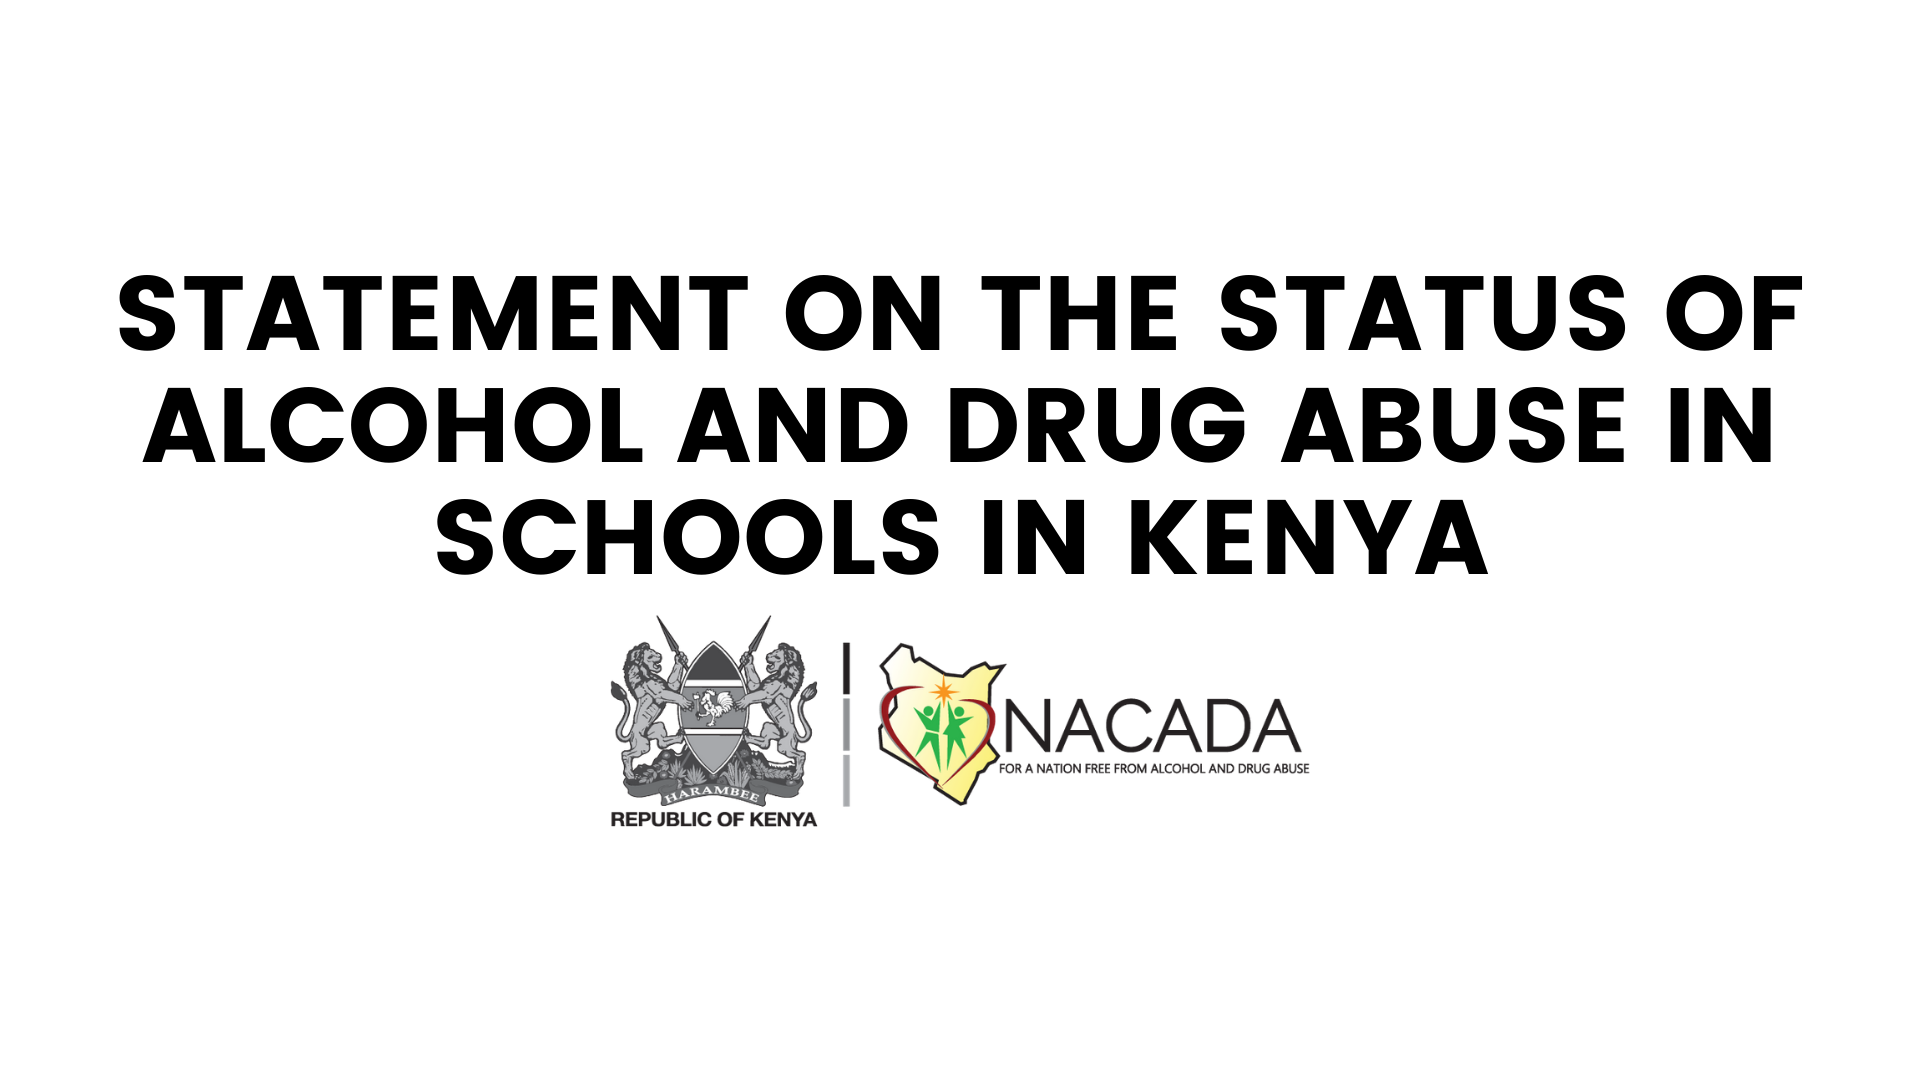 STATEMENT ON THE STATUS OF ALCOHOL AND DRUG ABUSE IN SCHOOLS IN KENYA